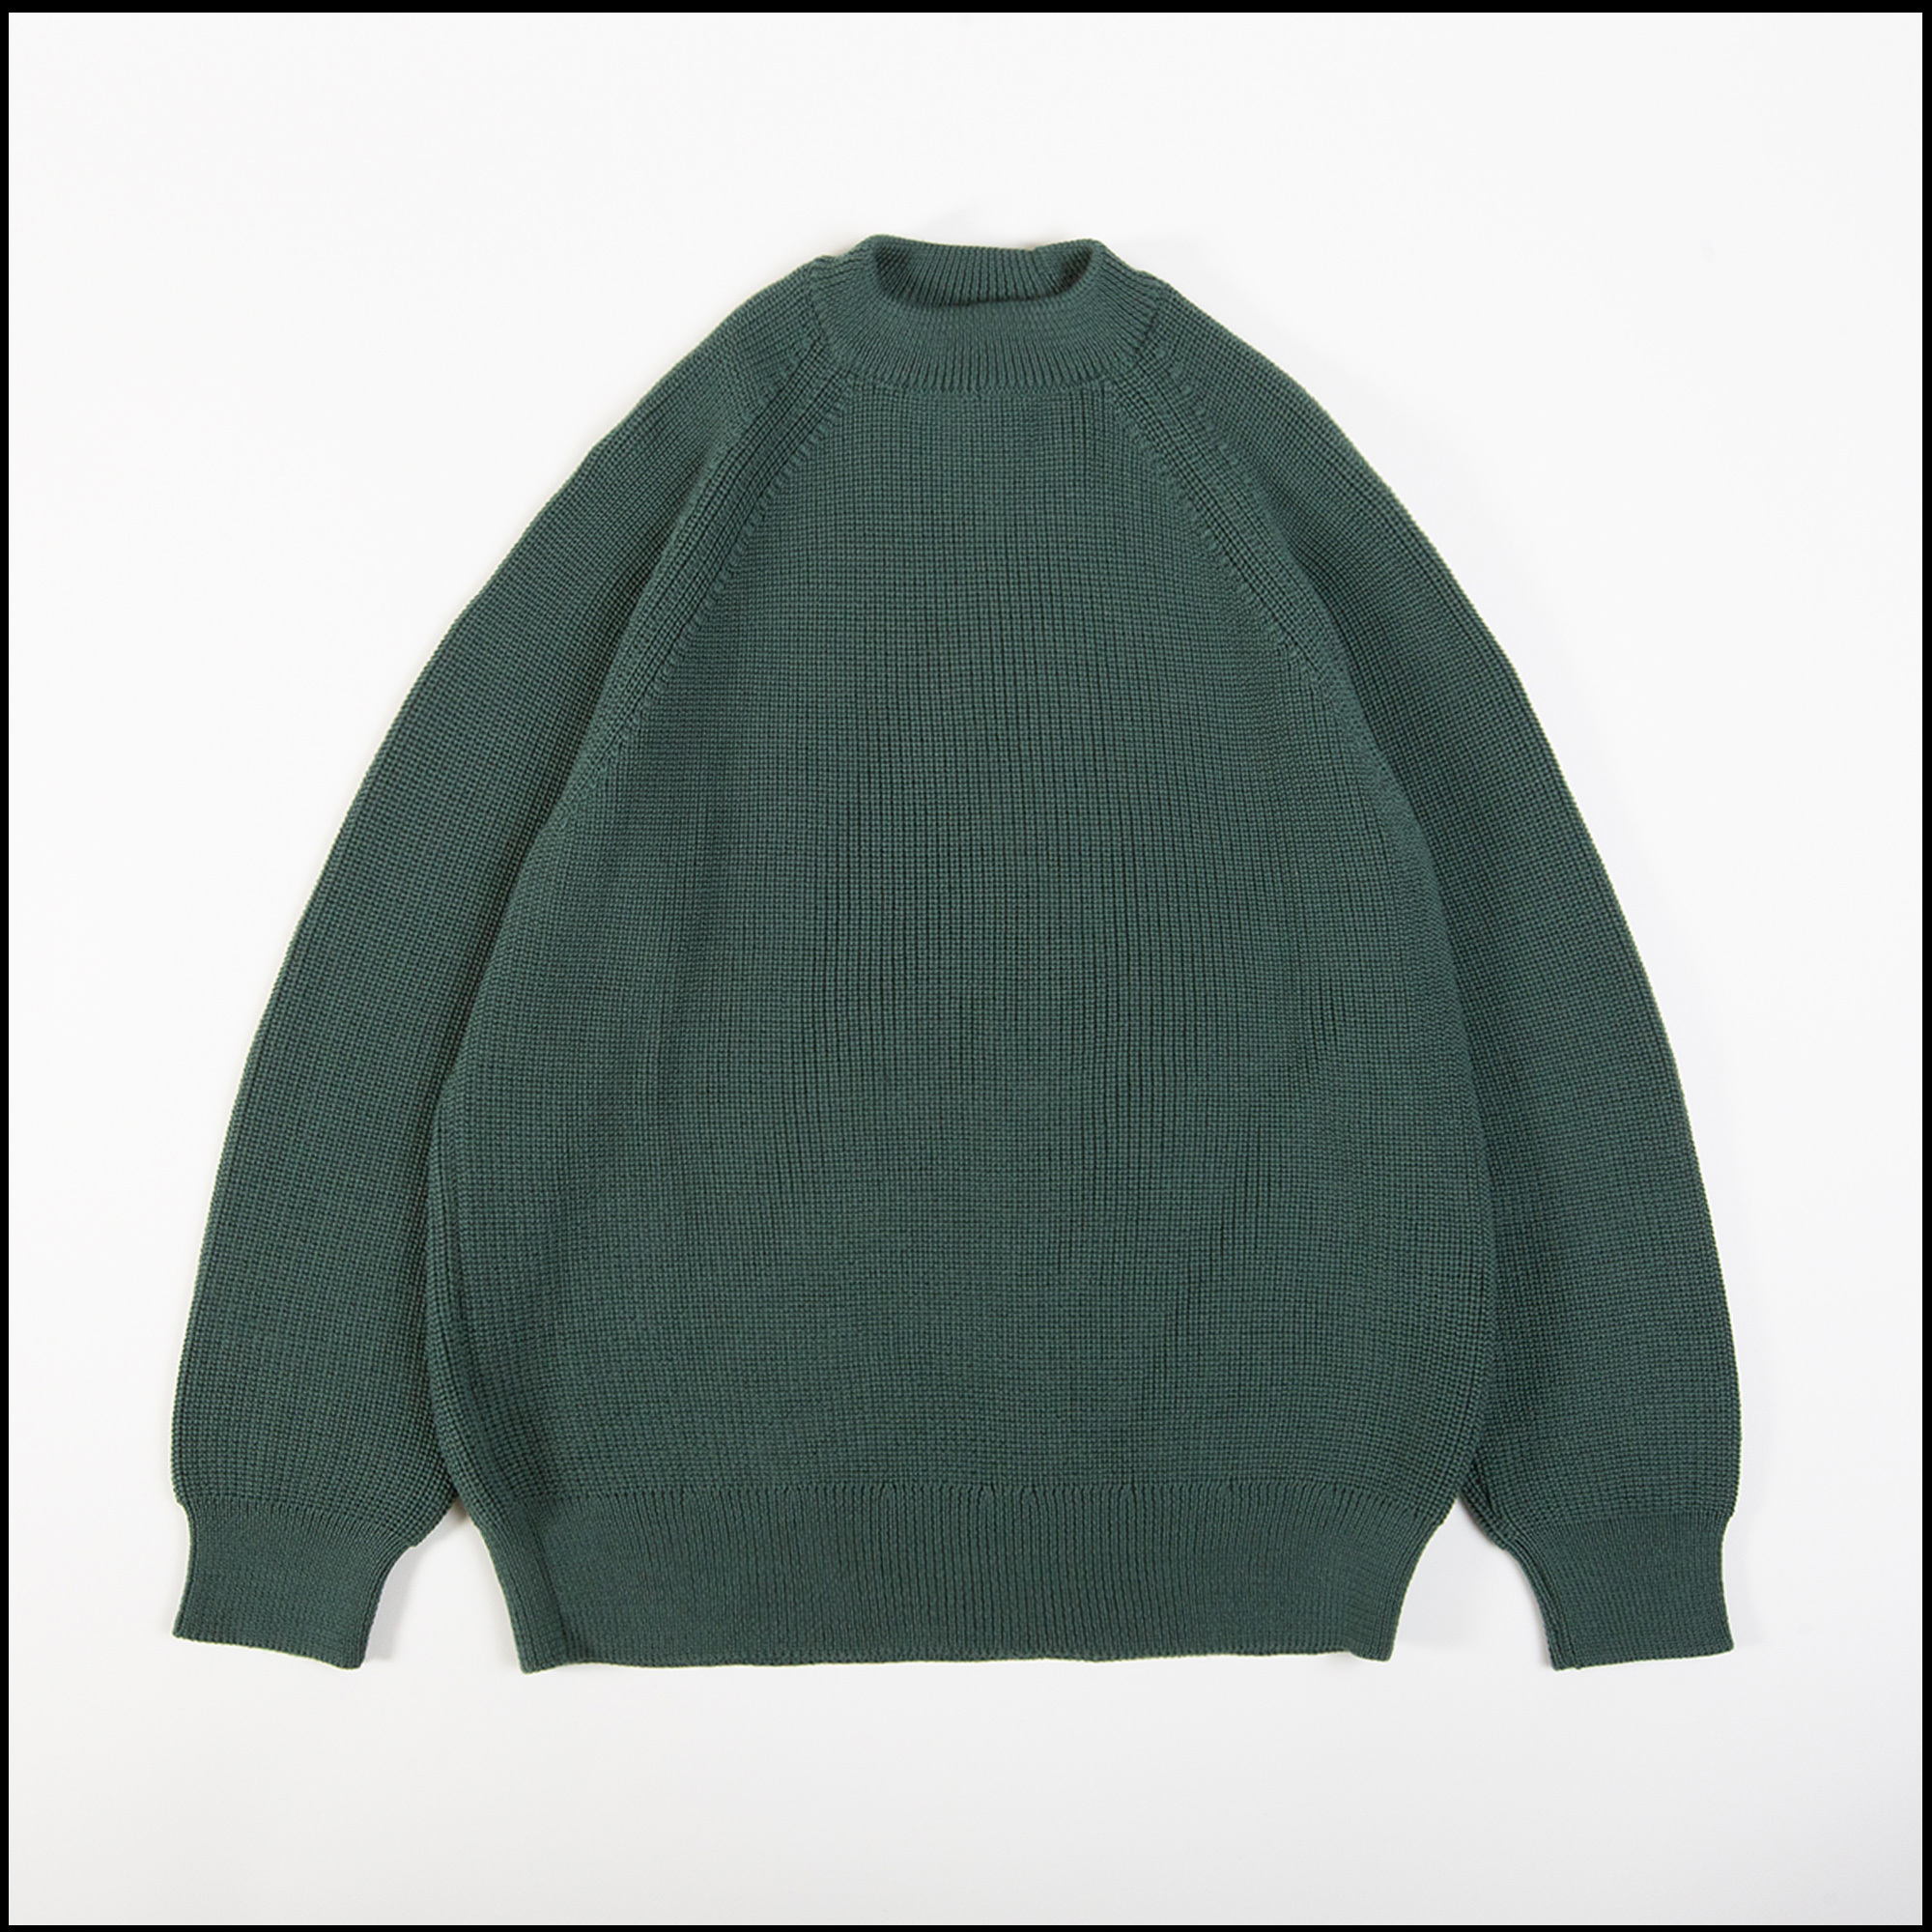 PLANO sweater in Emerald color by Arpenteur